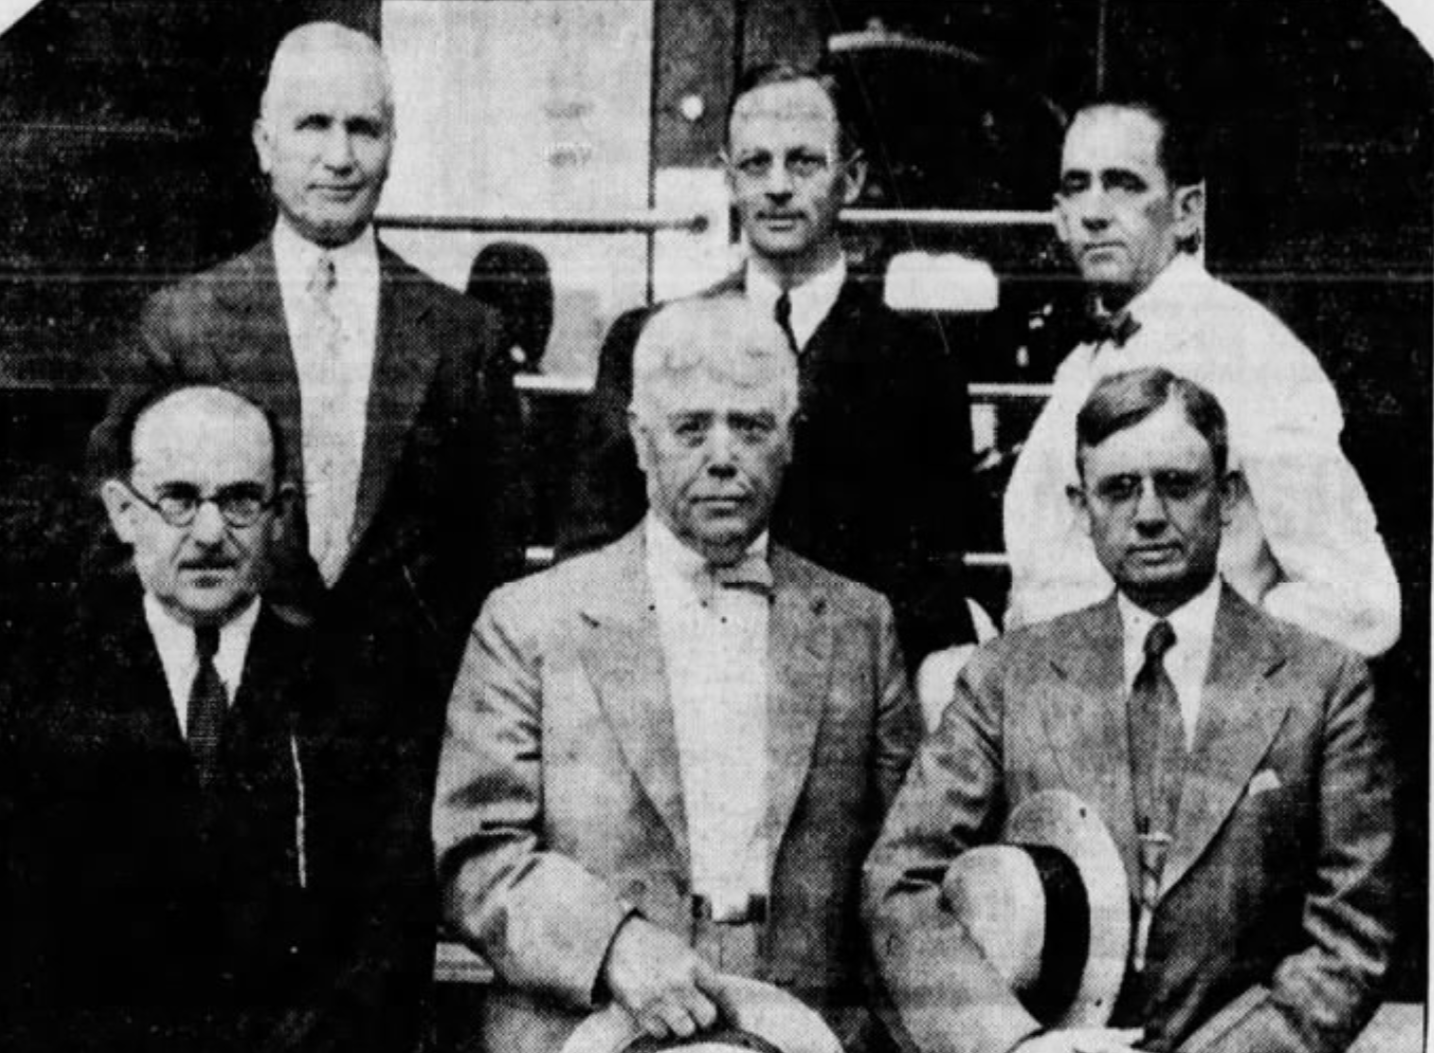 Six men stand together for a photograph.